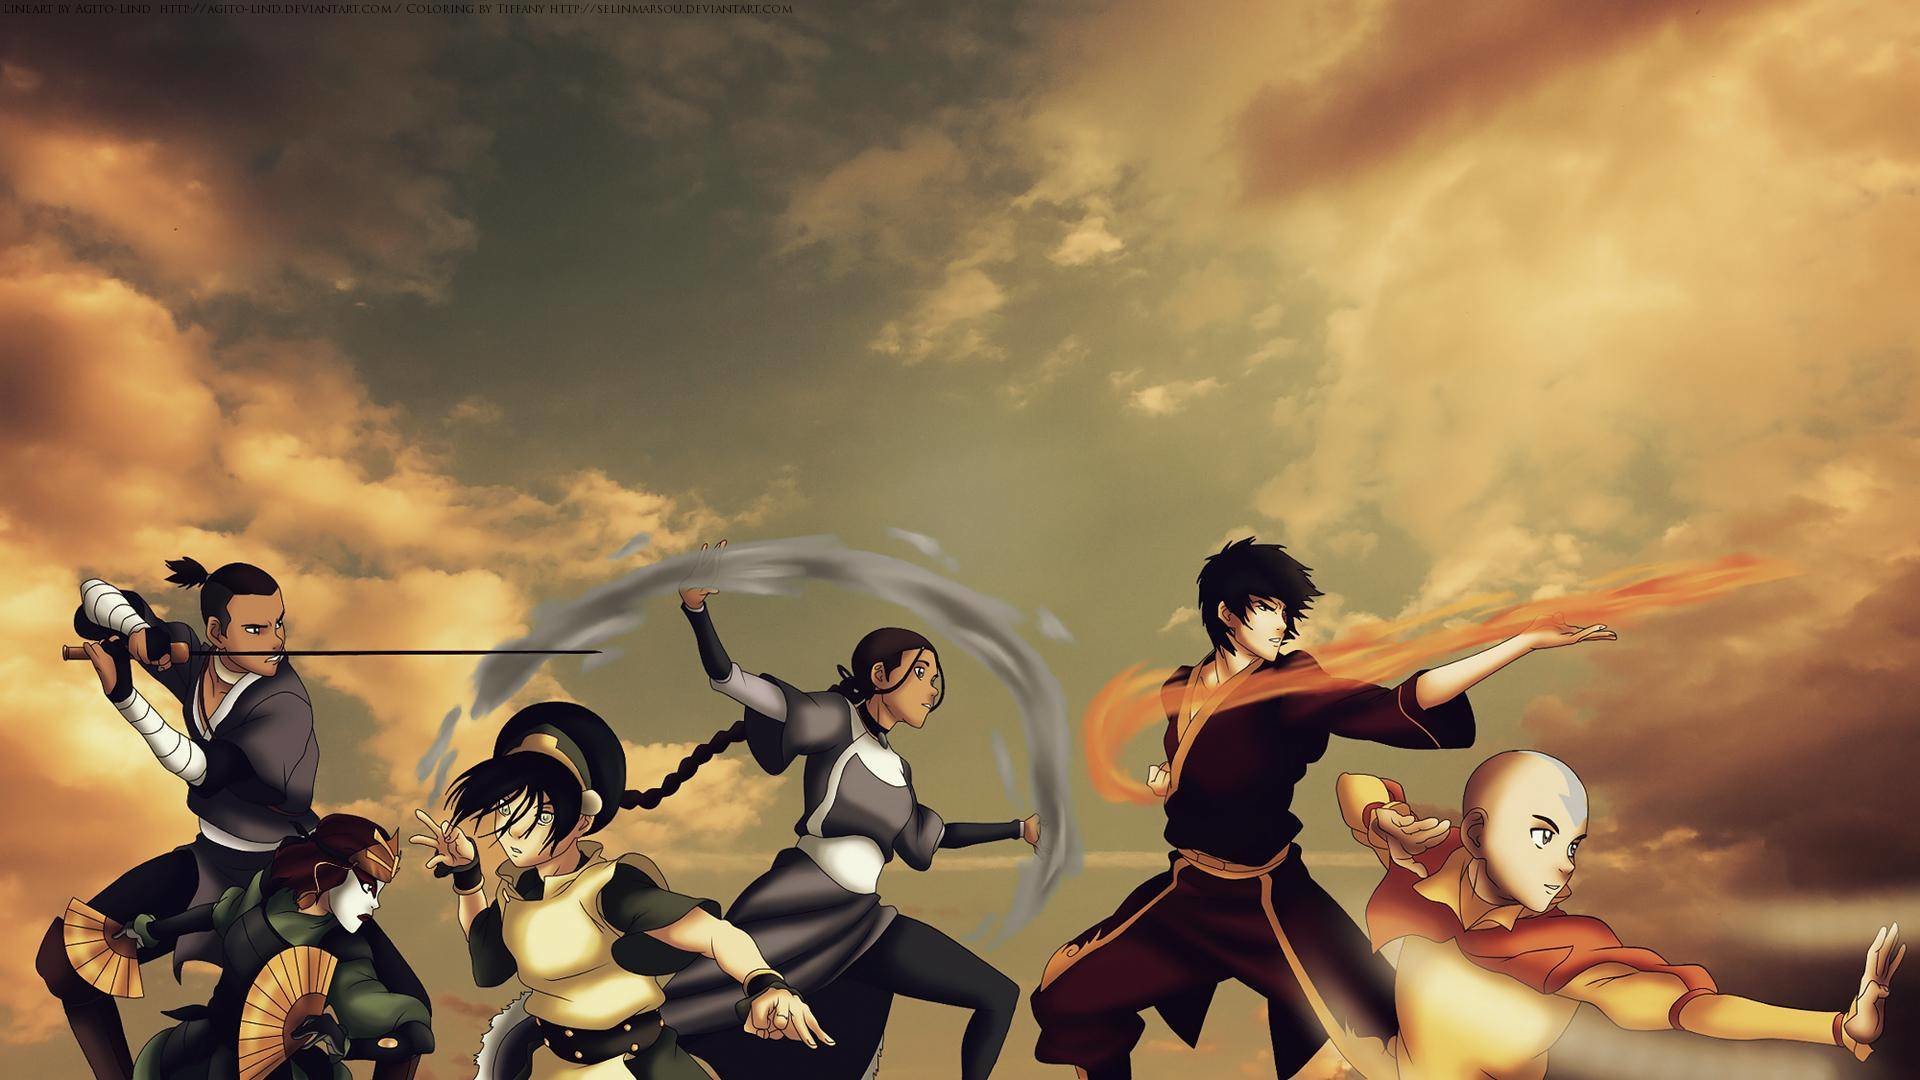 Best Avatar: The Last Airbender wallpaper ID:226670 for High Resolution hd 1920x1080 computer